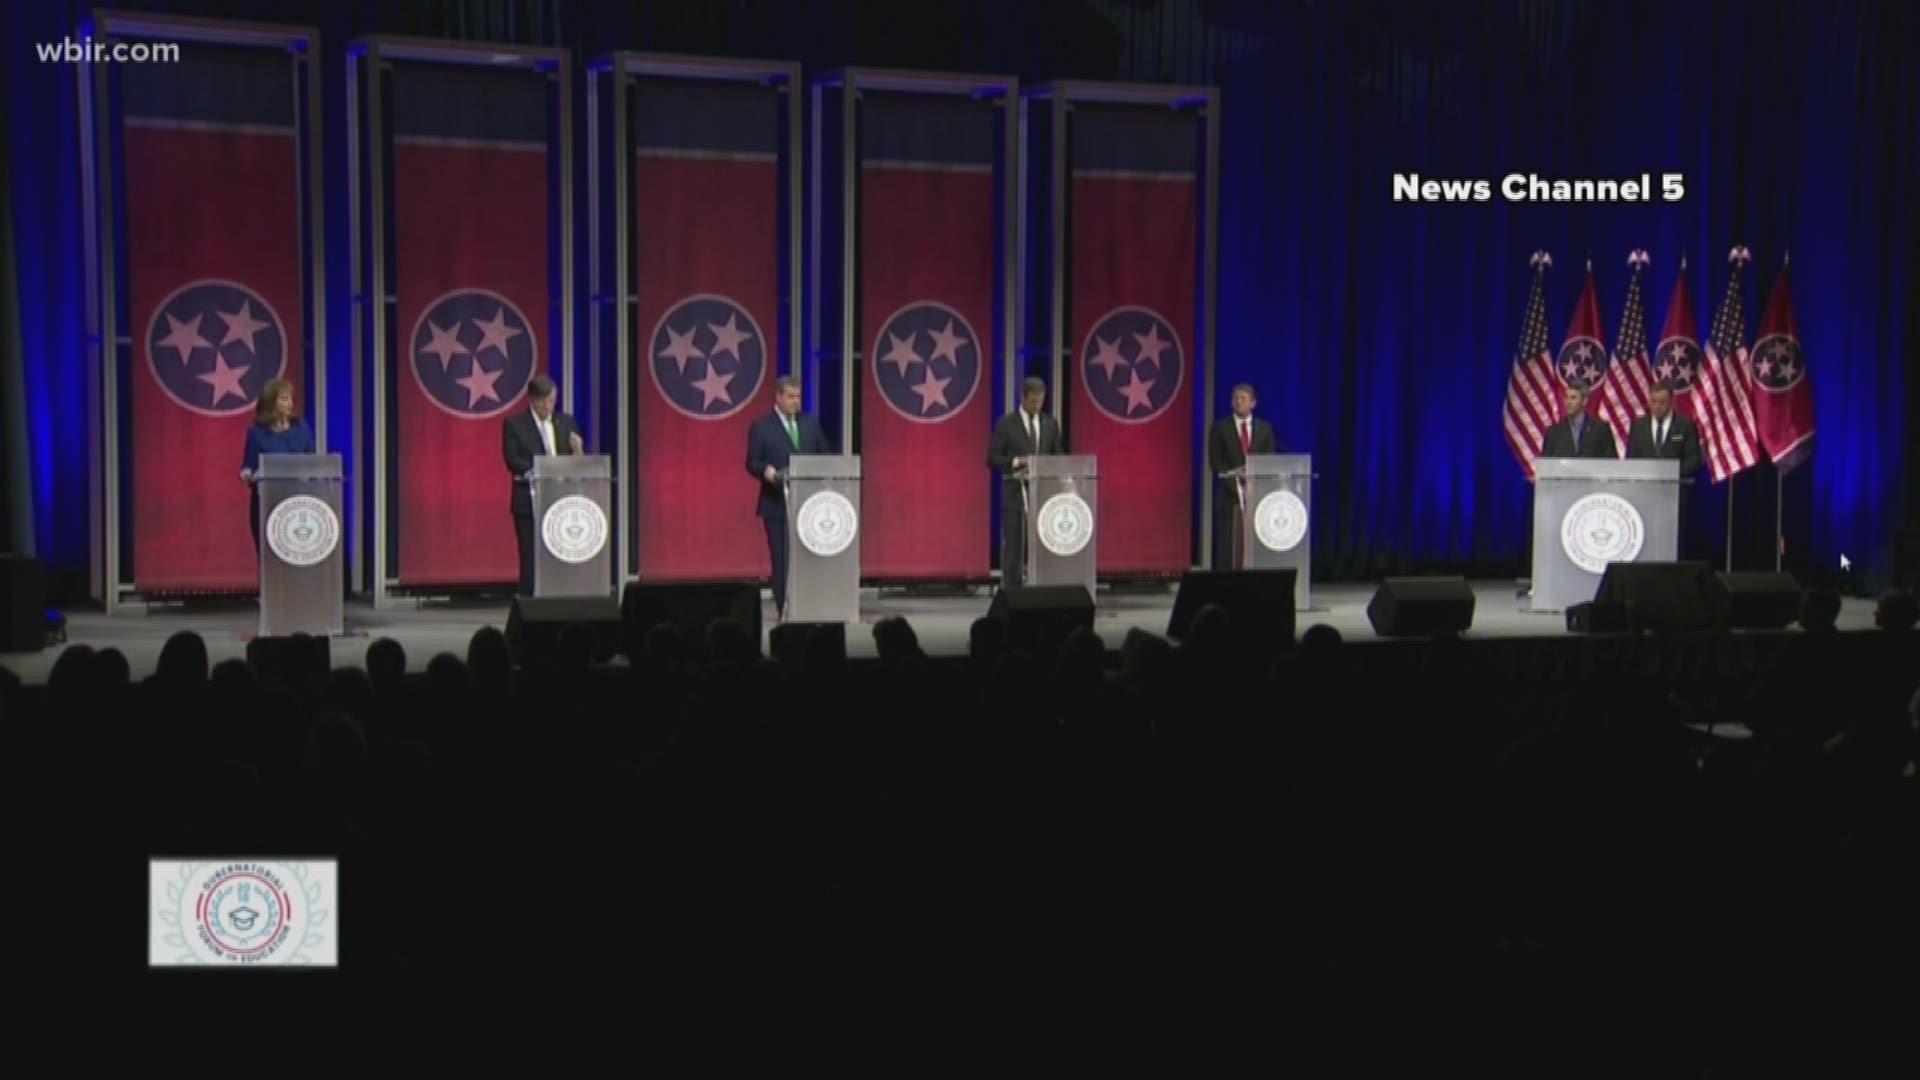 Jan. 23, 2018: Tennessee gubernatorial candidates weighed in on broad issues facing education during a forum at Belmont University.